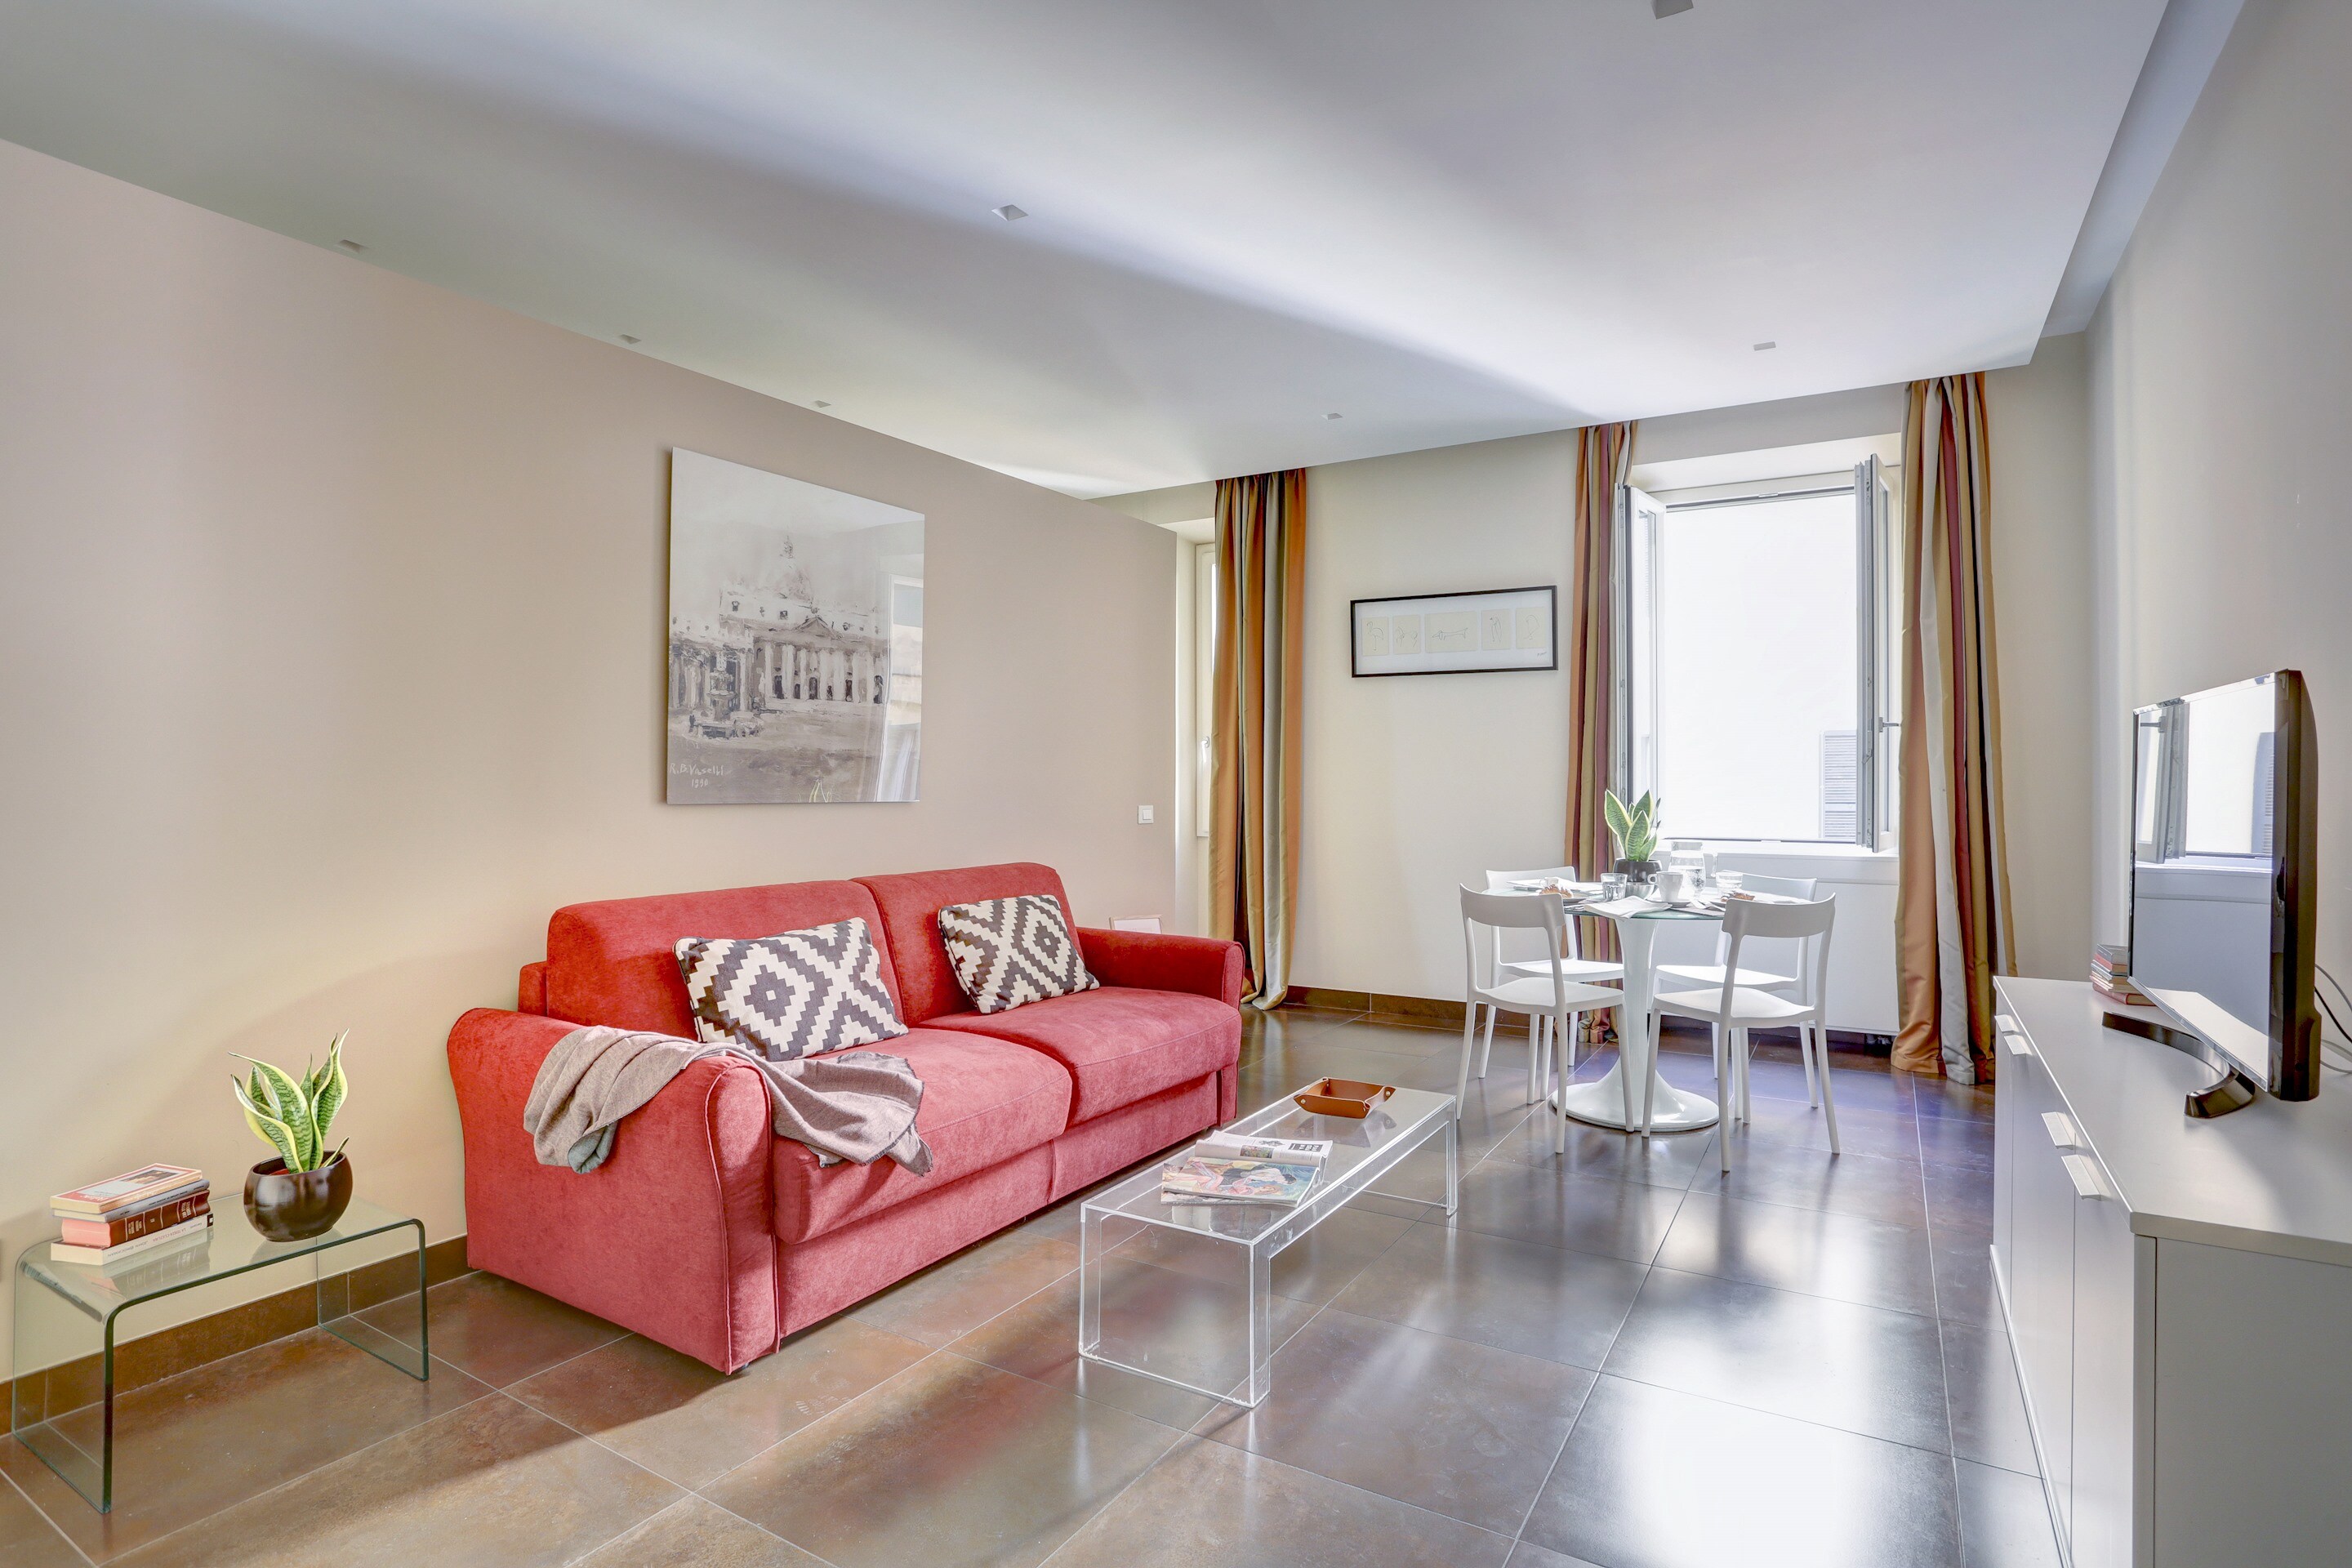 Property Image 1 - Comfortable Cheerful Apartment with Natural Light